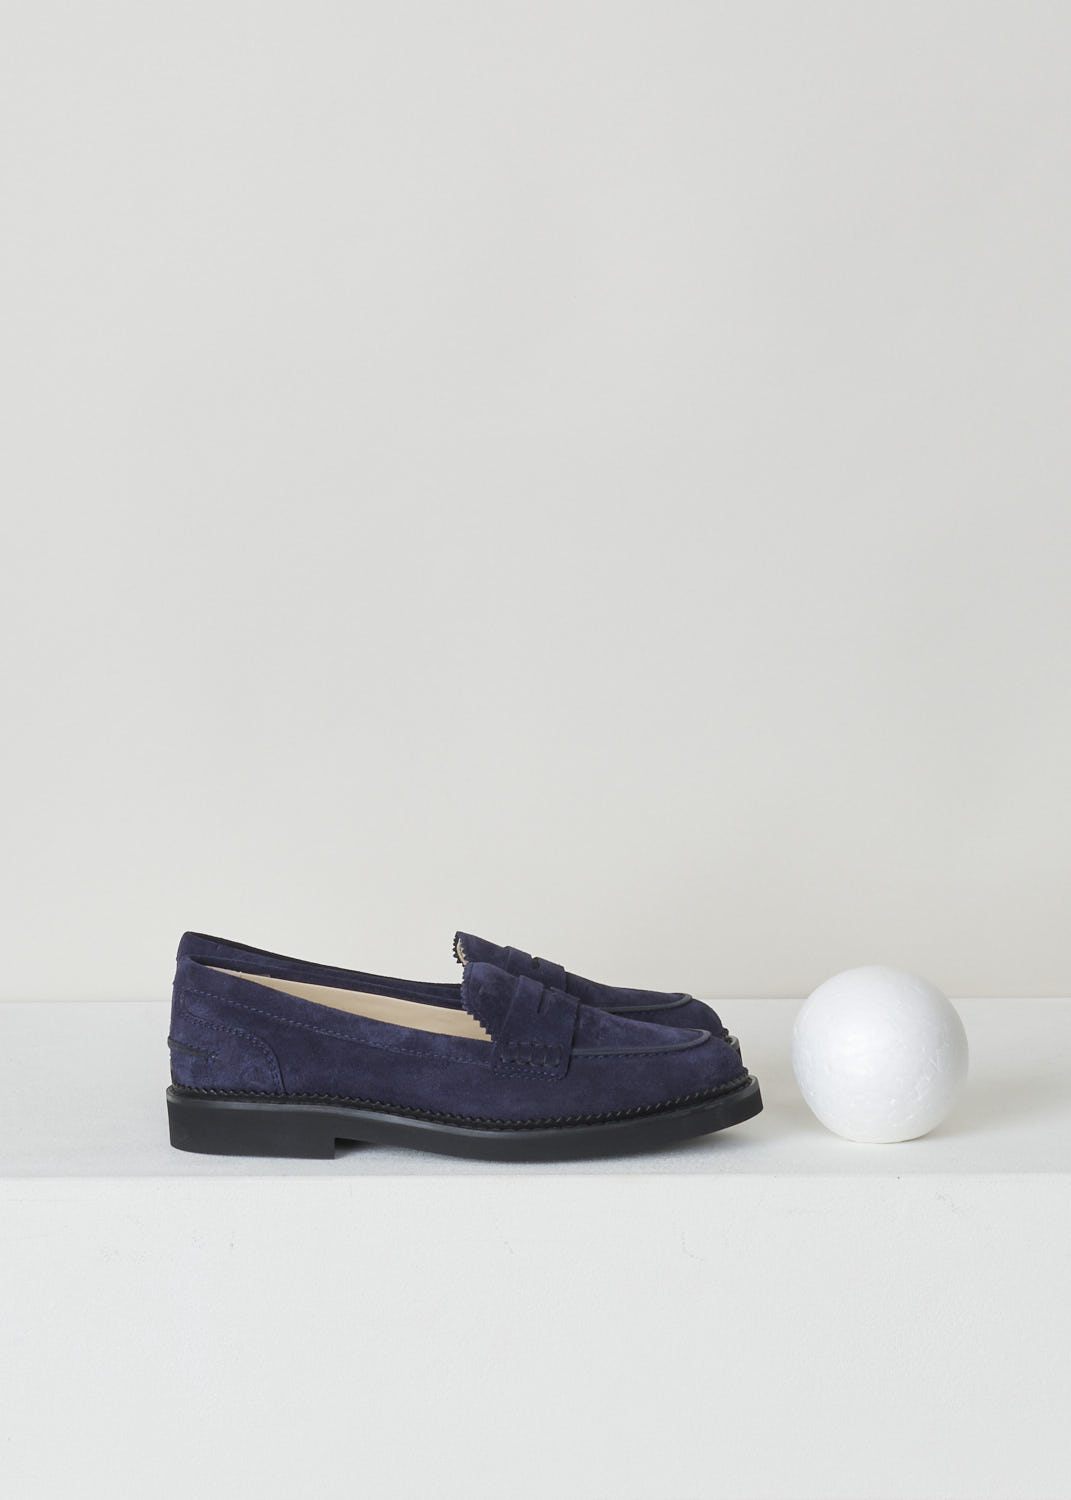 TODS, BLUE SUEDE PENNY LOAFERS, XXW76B0BP10RE0U824, Blue, Side, These blue suede slip-on penny loafers have a rounded toe and a decorative slotted leather strip over the upper side. The upper side being decorated with serrated edges. These loafers have black soles. 
